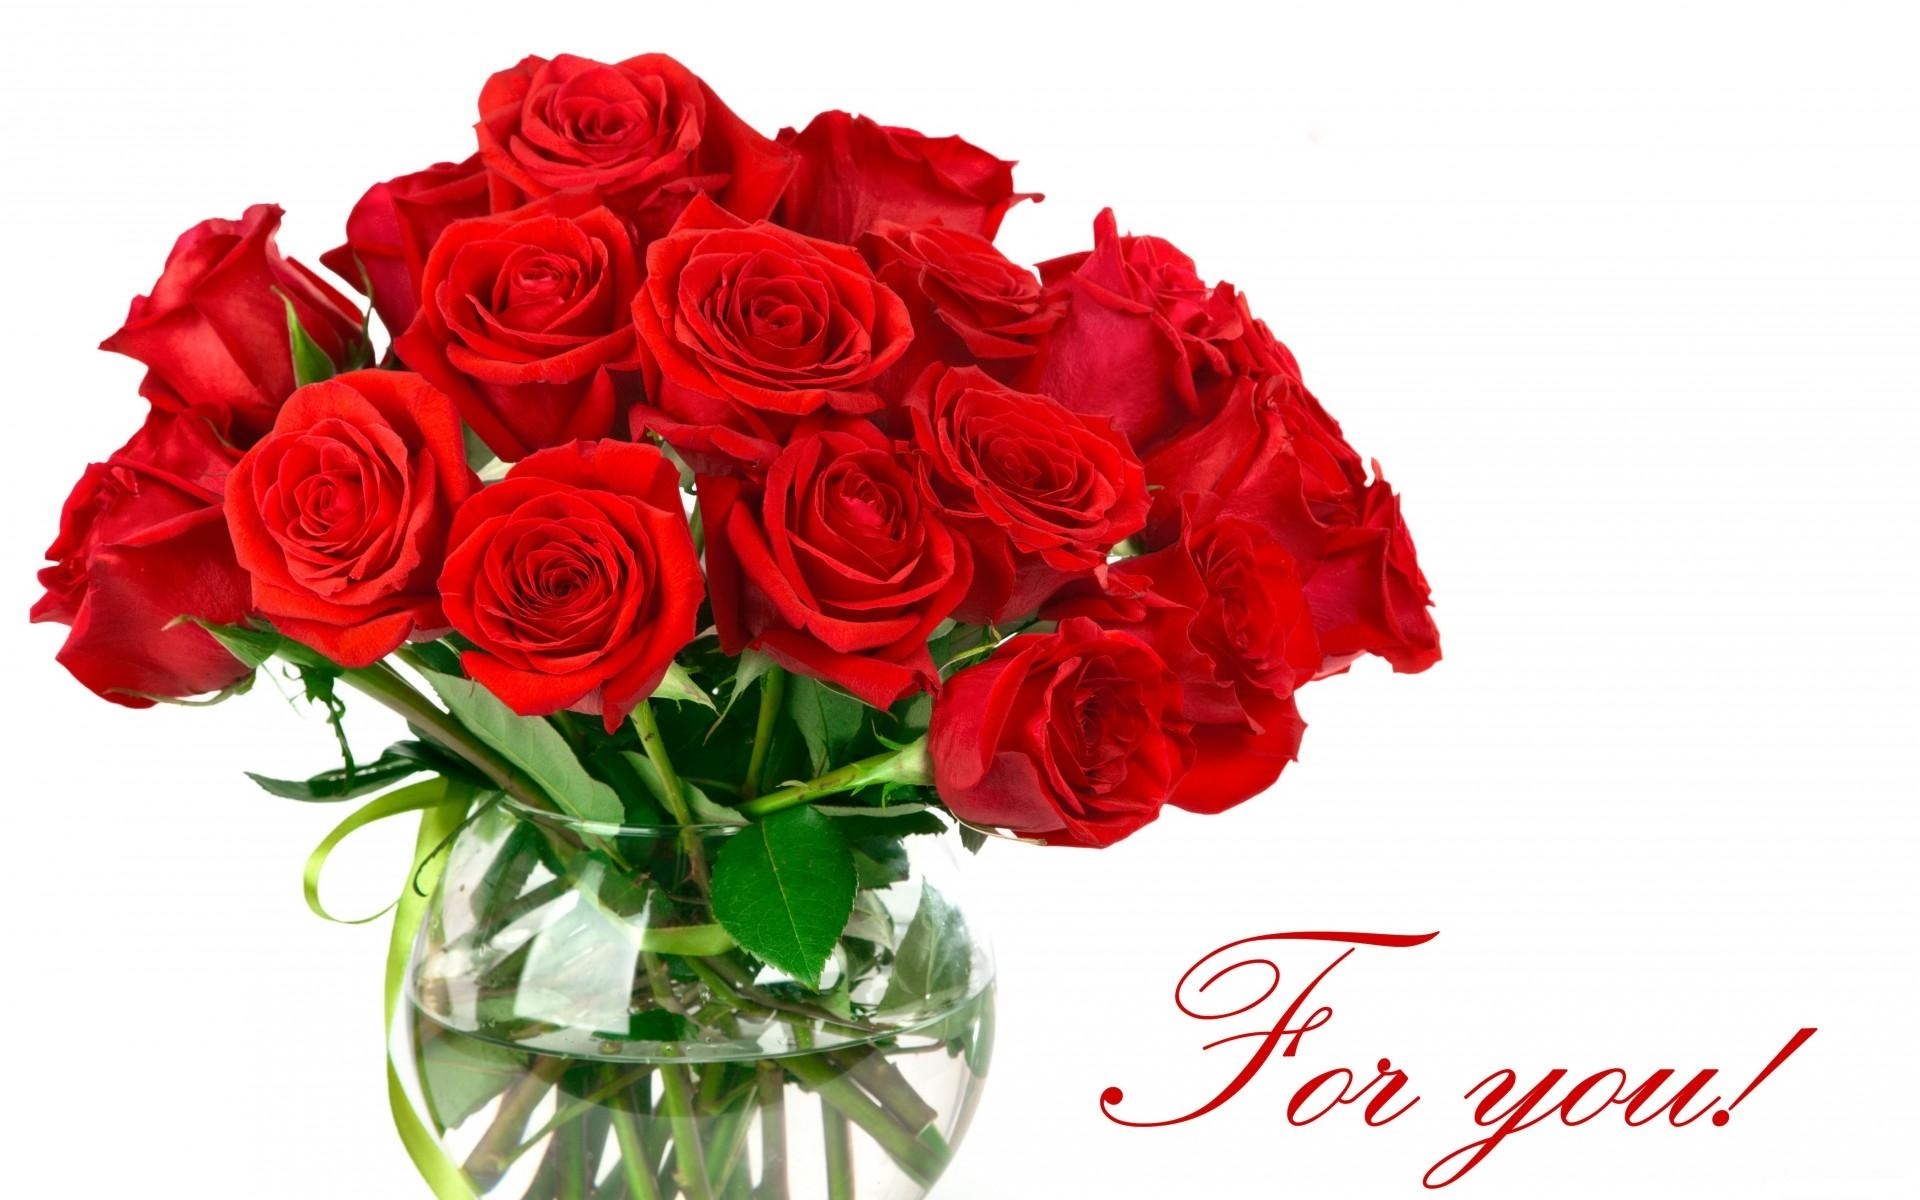 50 Beautiful Red Rose Images To Download – The WoW Style